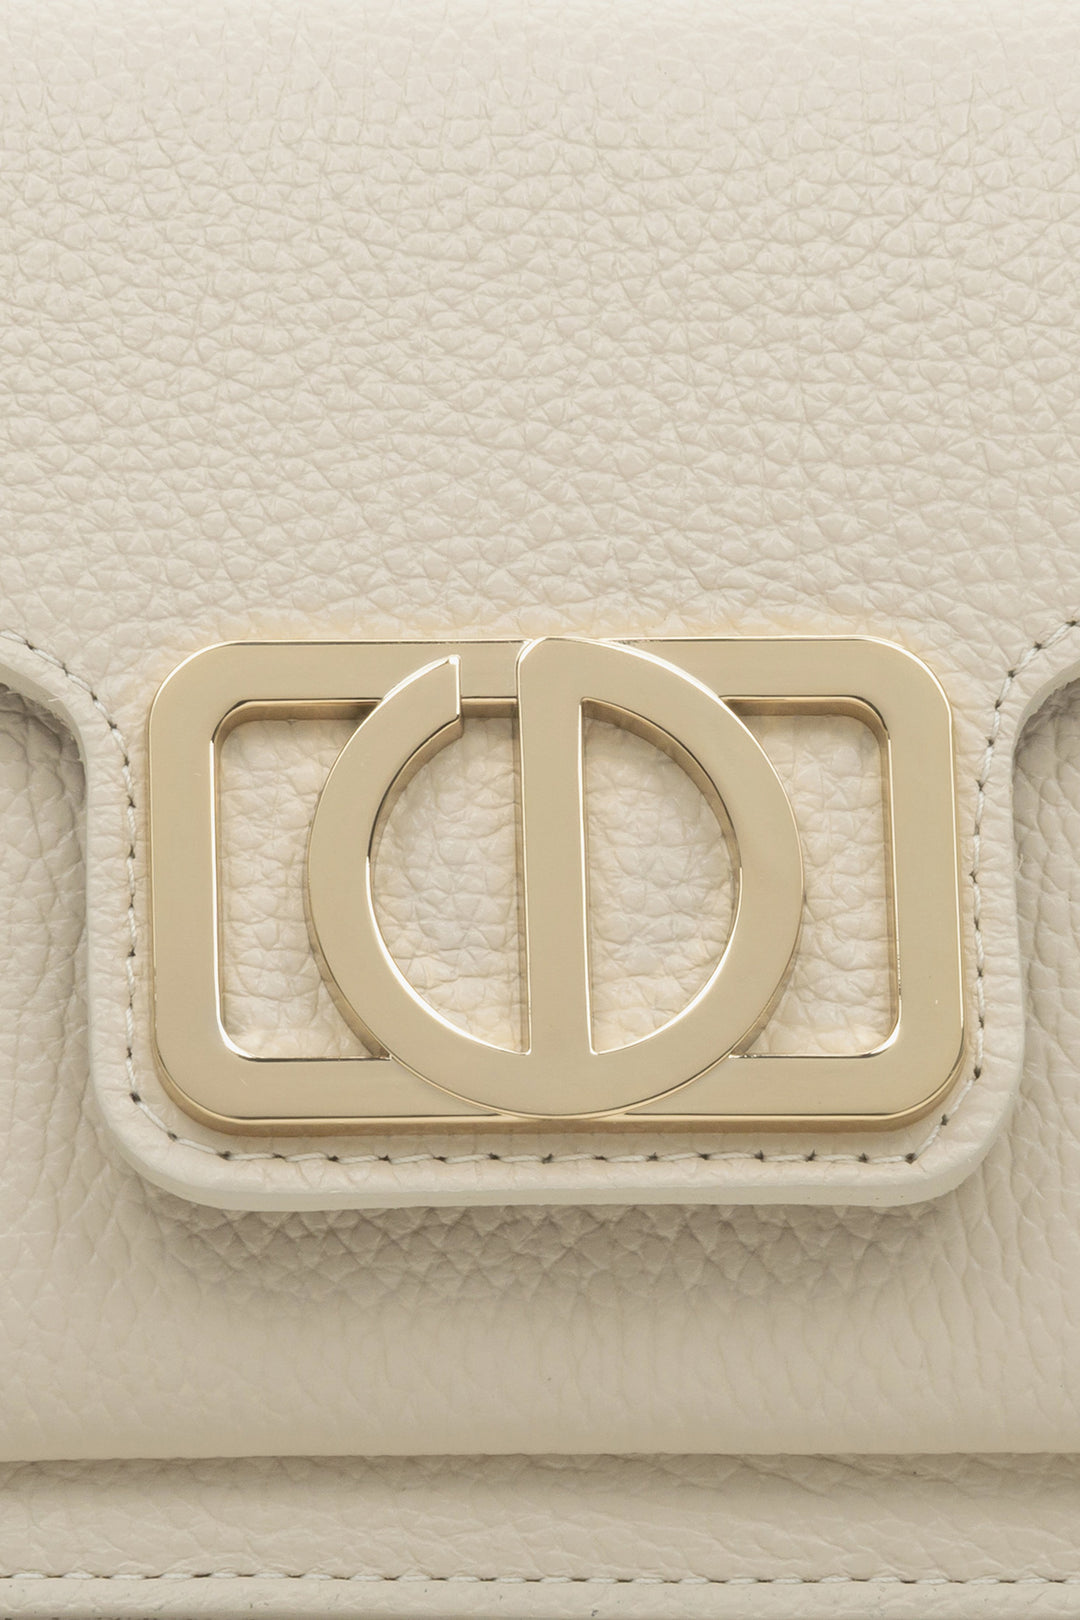 Women's milky-beige shoulder bag made of Italian genuine leather by Estro - close-up on the details.